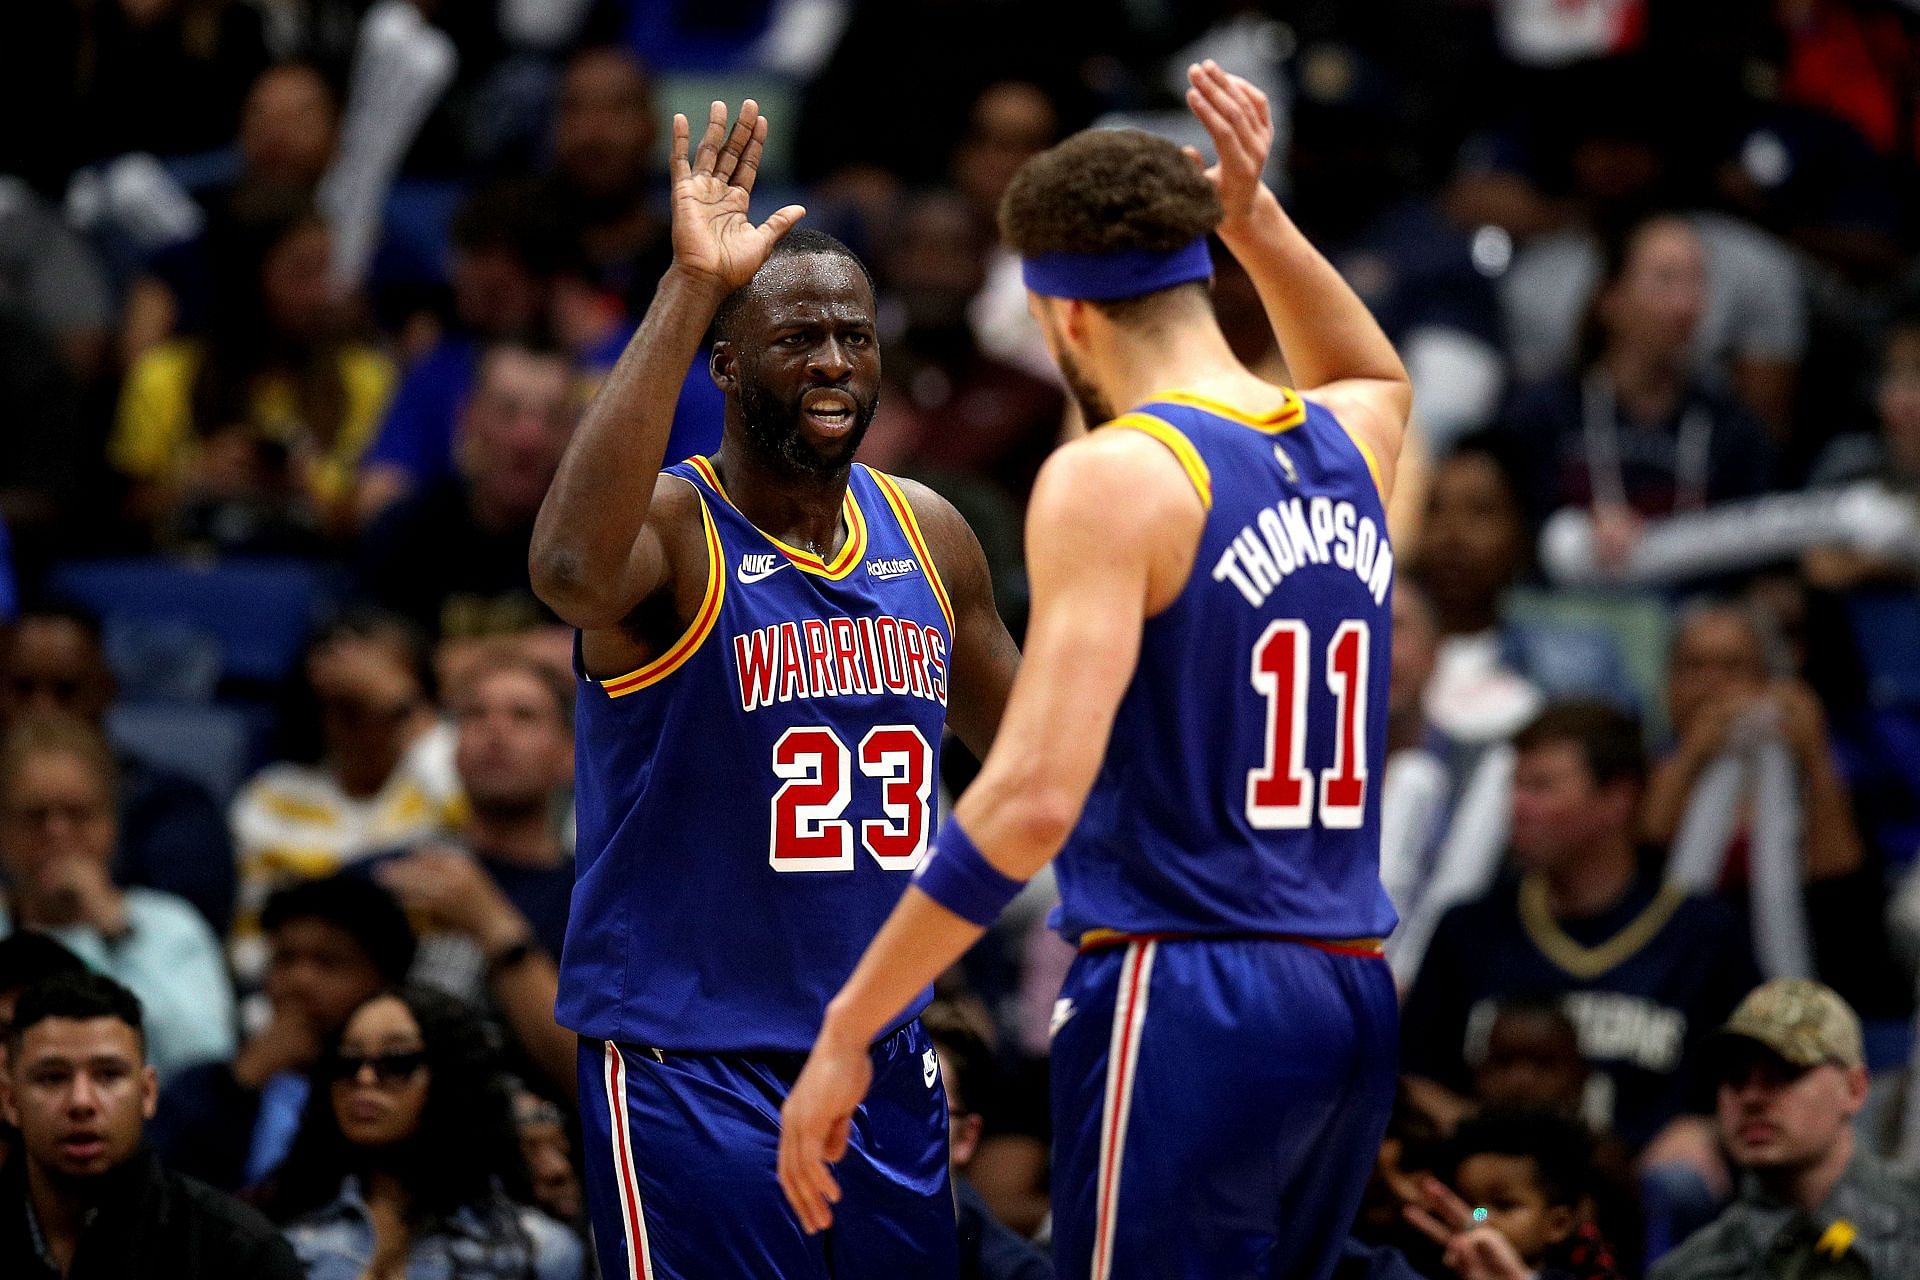 Draymond Green #23 of the Golden State Warriors and Klay Thompson #11 of the Golden State Warriors reacts after scoring a basket during the second quarter of an NBA game against the New Orleans Pelicans at Smoothie King Center on April 10, 2022 in New Orleans, Louisiana.